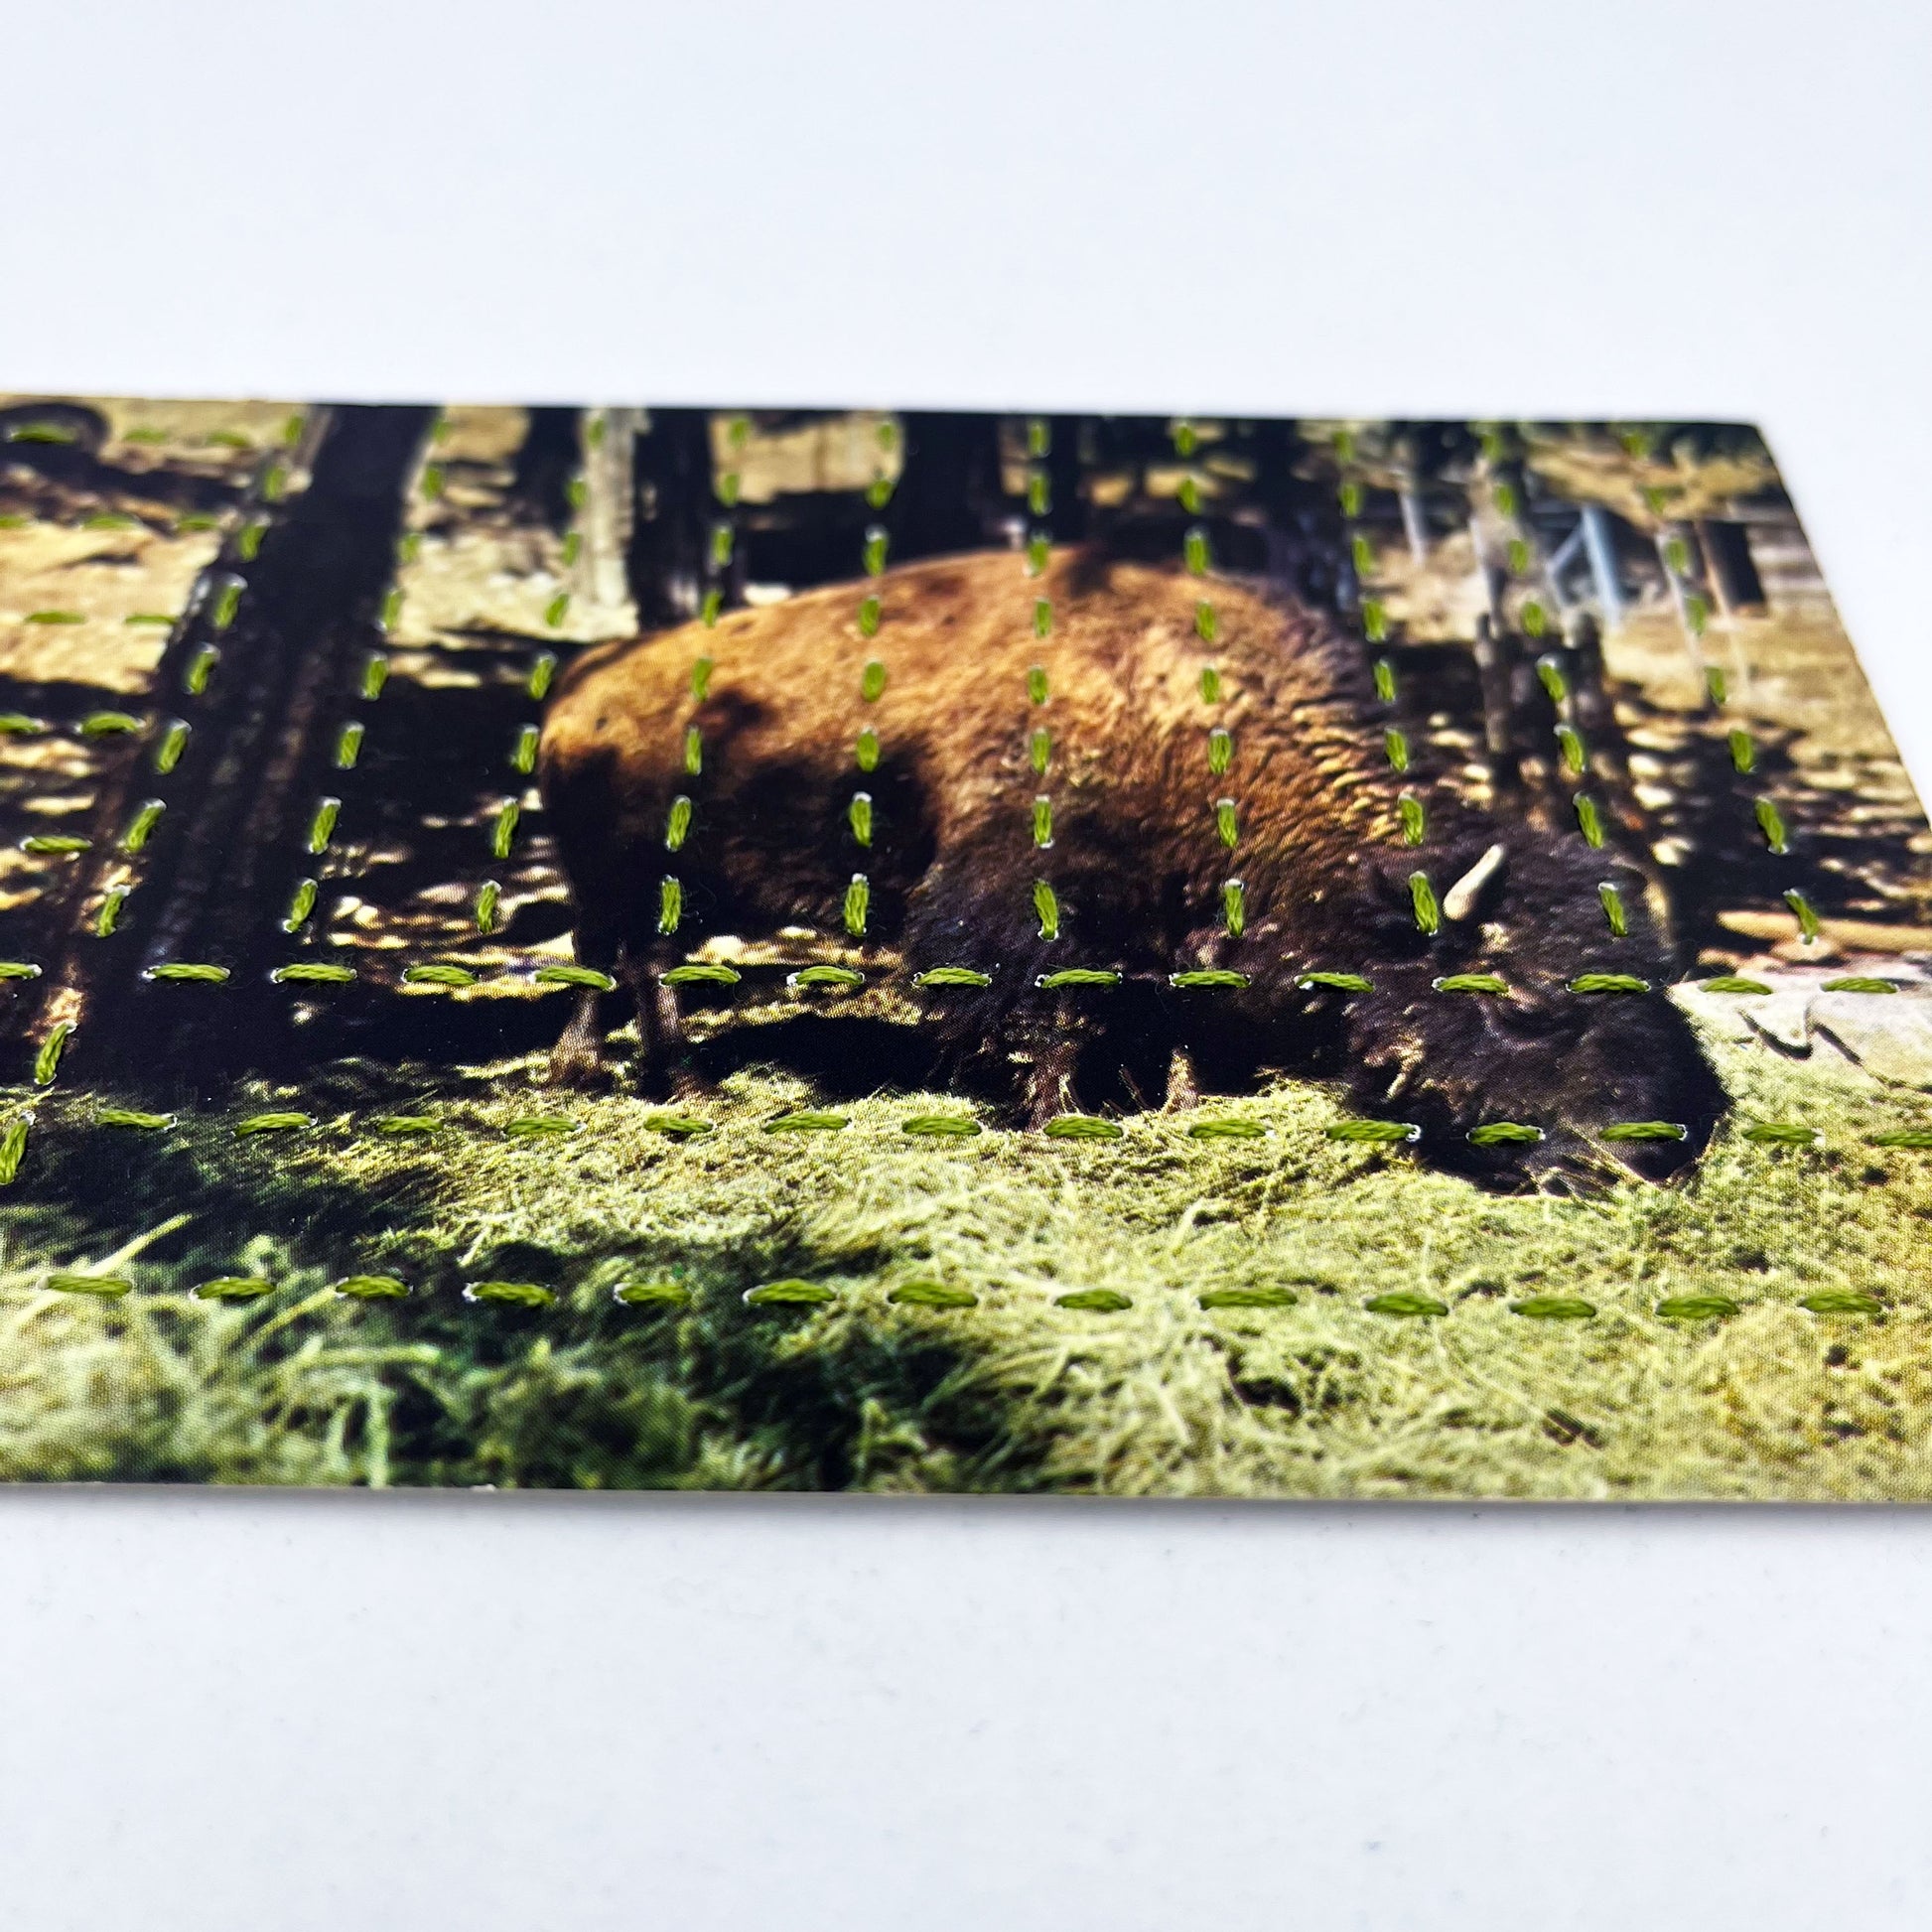 vintage postcard of a buffalo grazing in a forest, hand stitched with pine green thread in a basketweave pattern